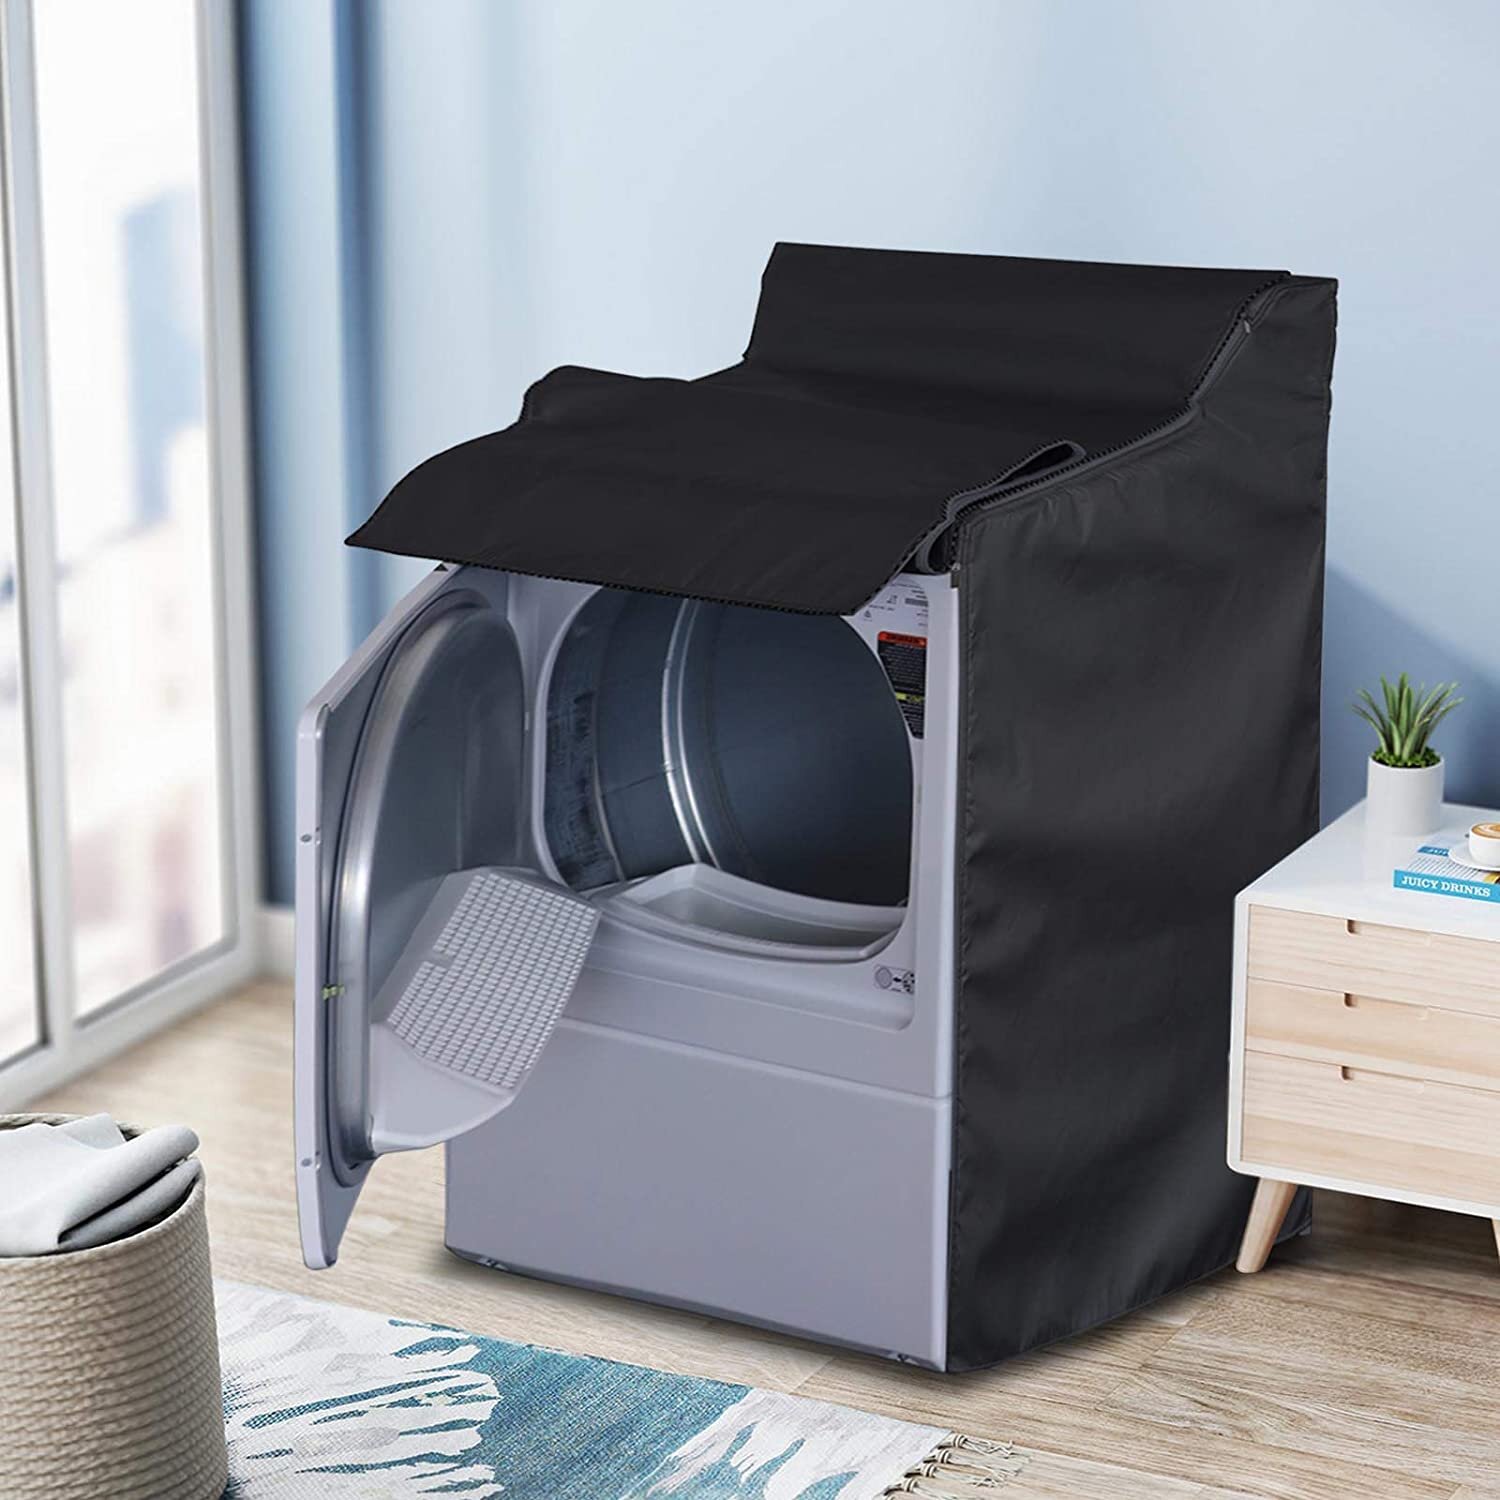  Washing Machine Cover,Washer Cover Dryer Cover Durable Thicker  Fabric 2 Zippers Design for Convenient use.Fit Most Top Load or Front Load  Washers/Dryers,All Weather Protection,Basic Gray : Appliances